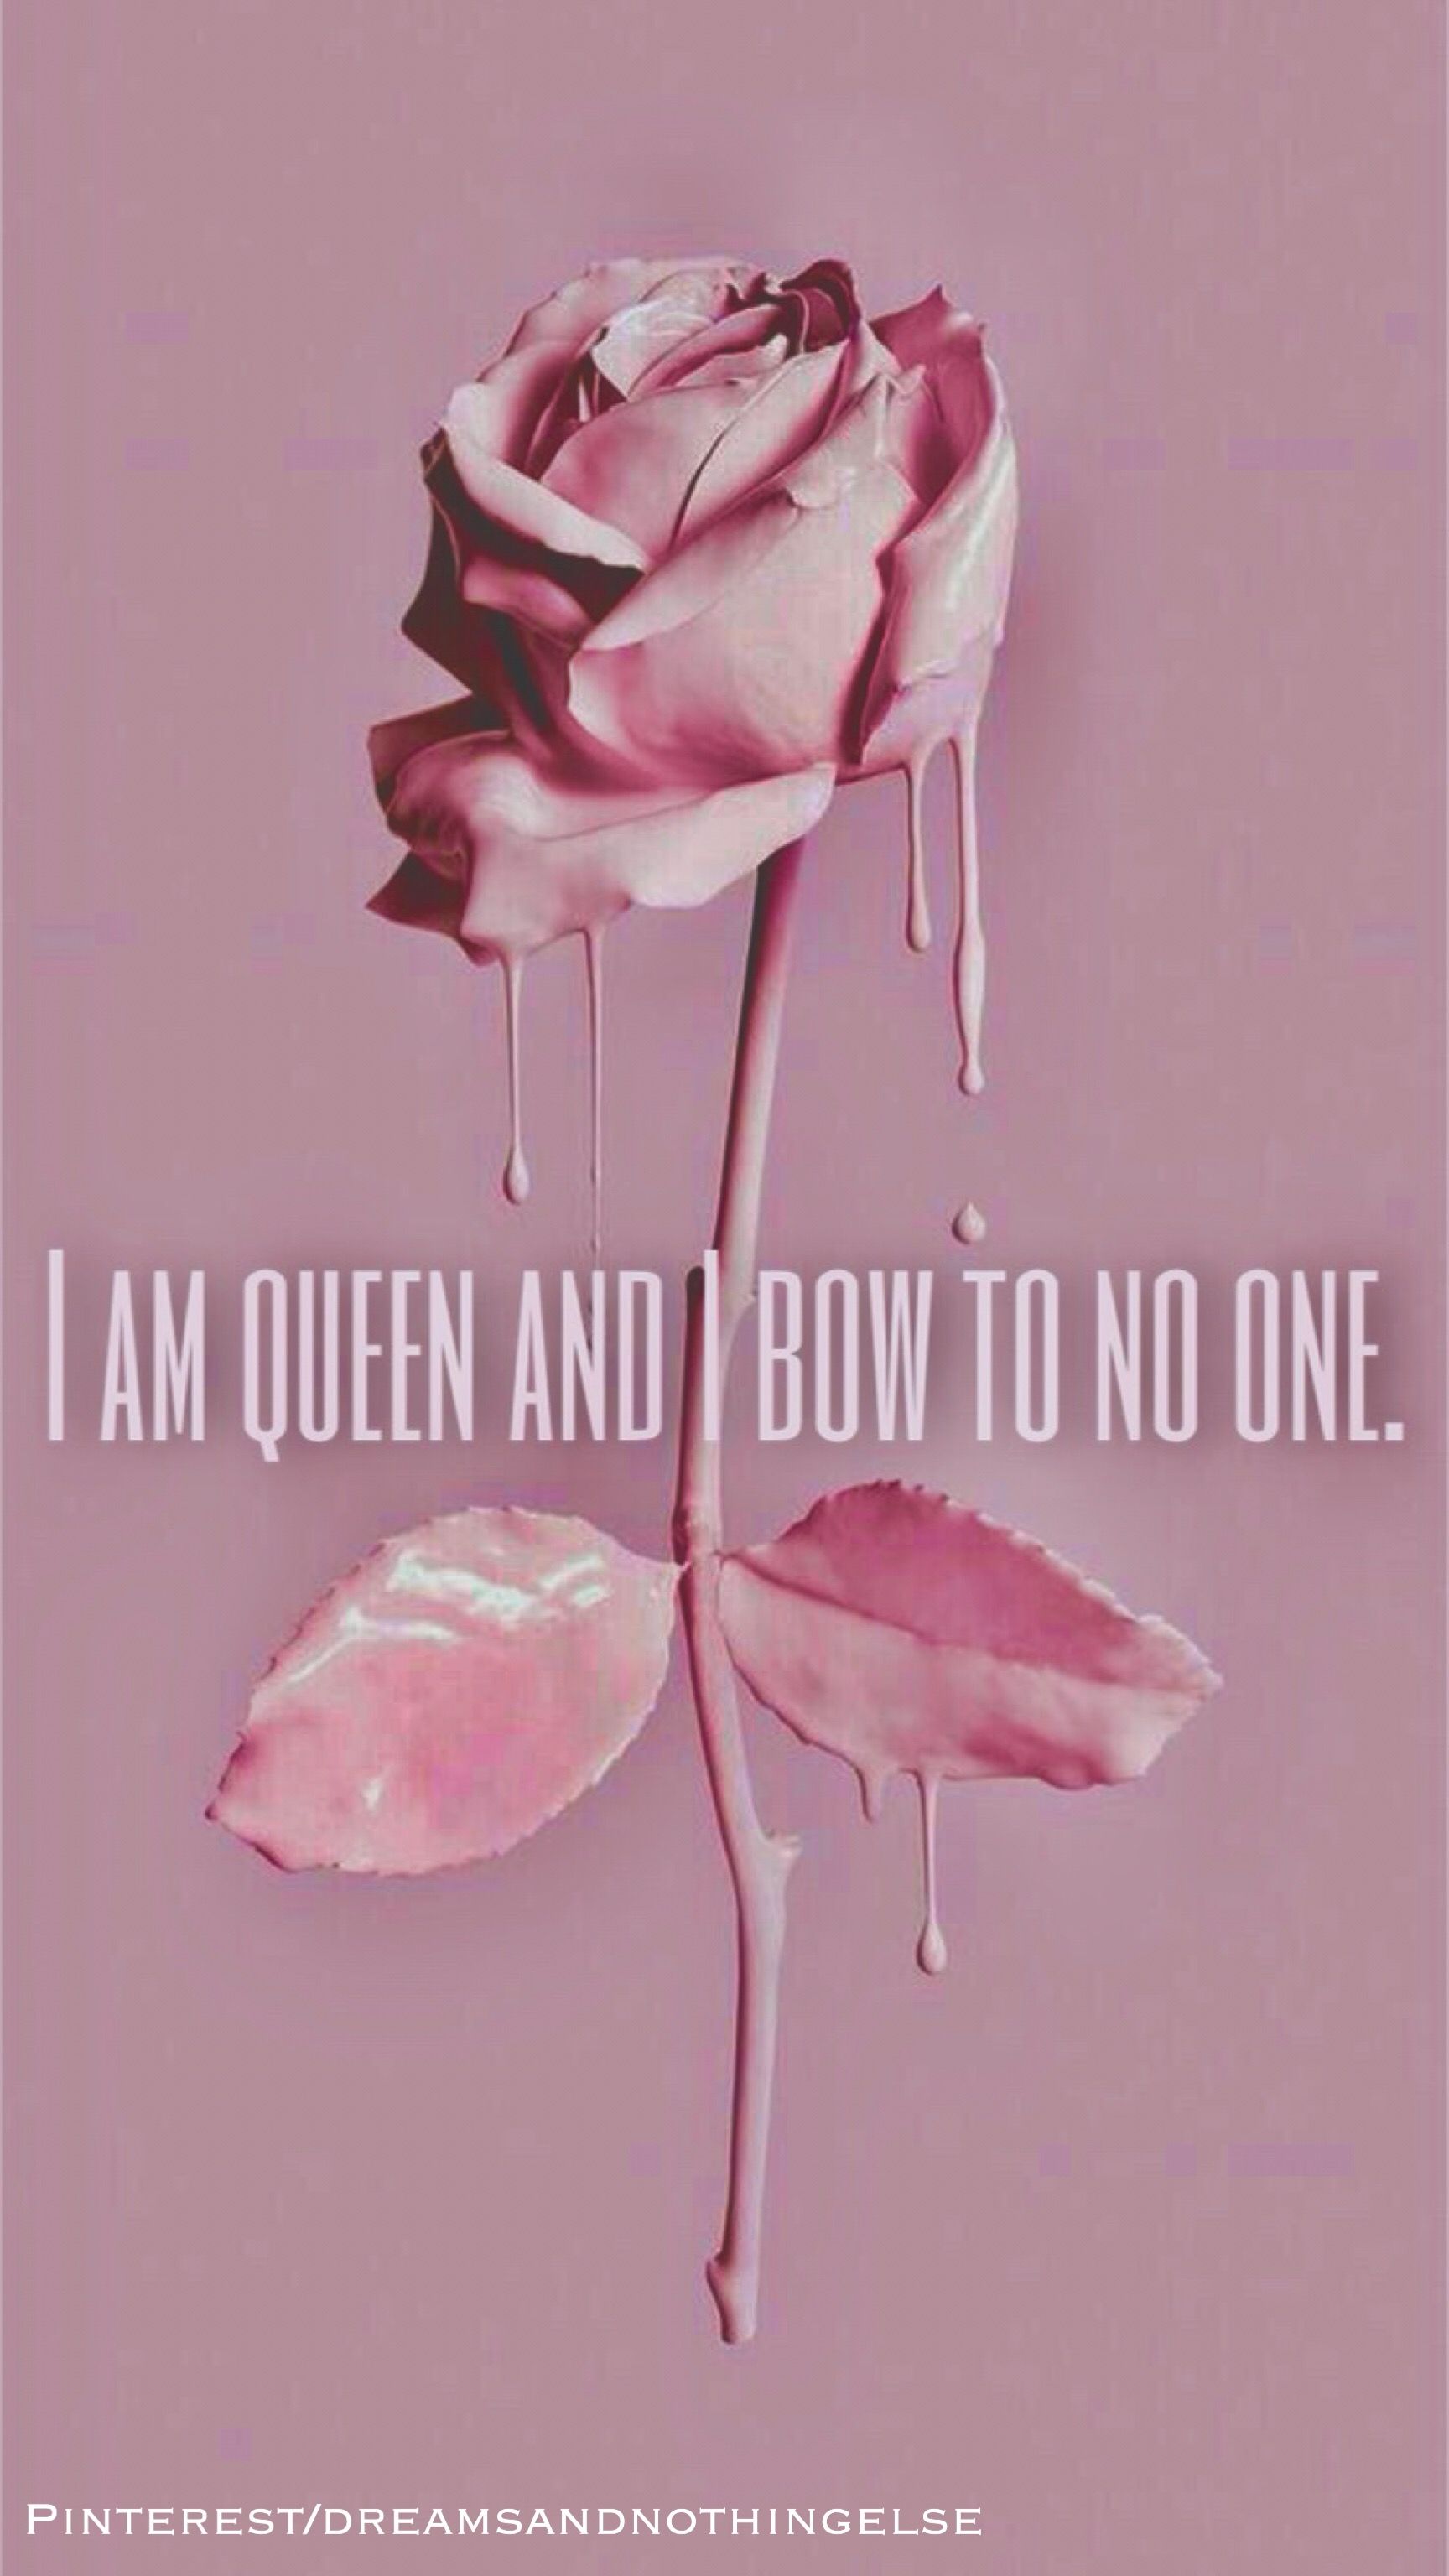 I am queen and I bow to no one quote wallpaper iphone rose pastel pink. Rose gold wallpaper iphone, Pink queen wallpaper, Queens wallpaper